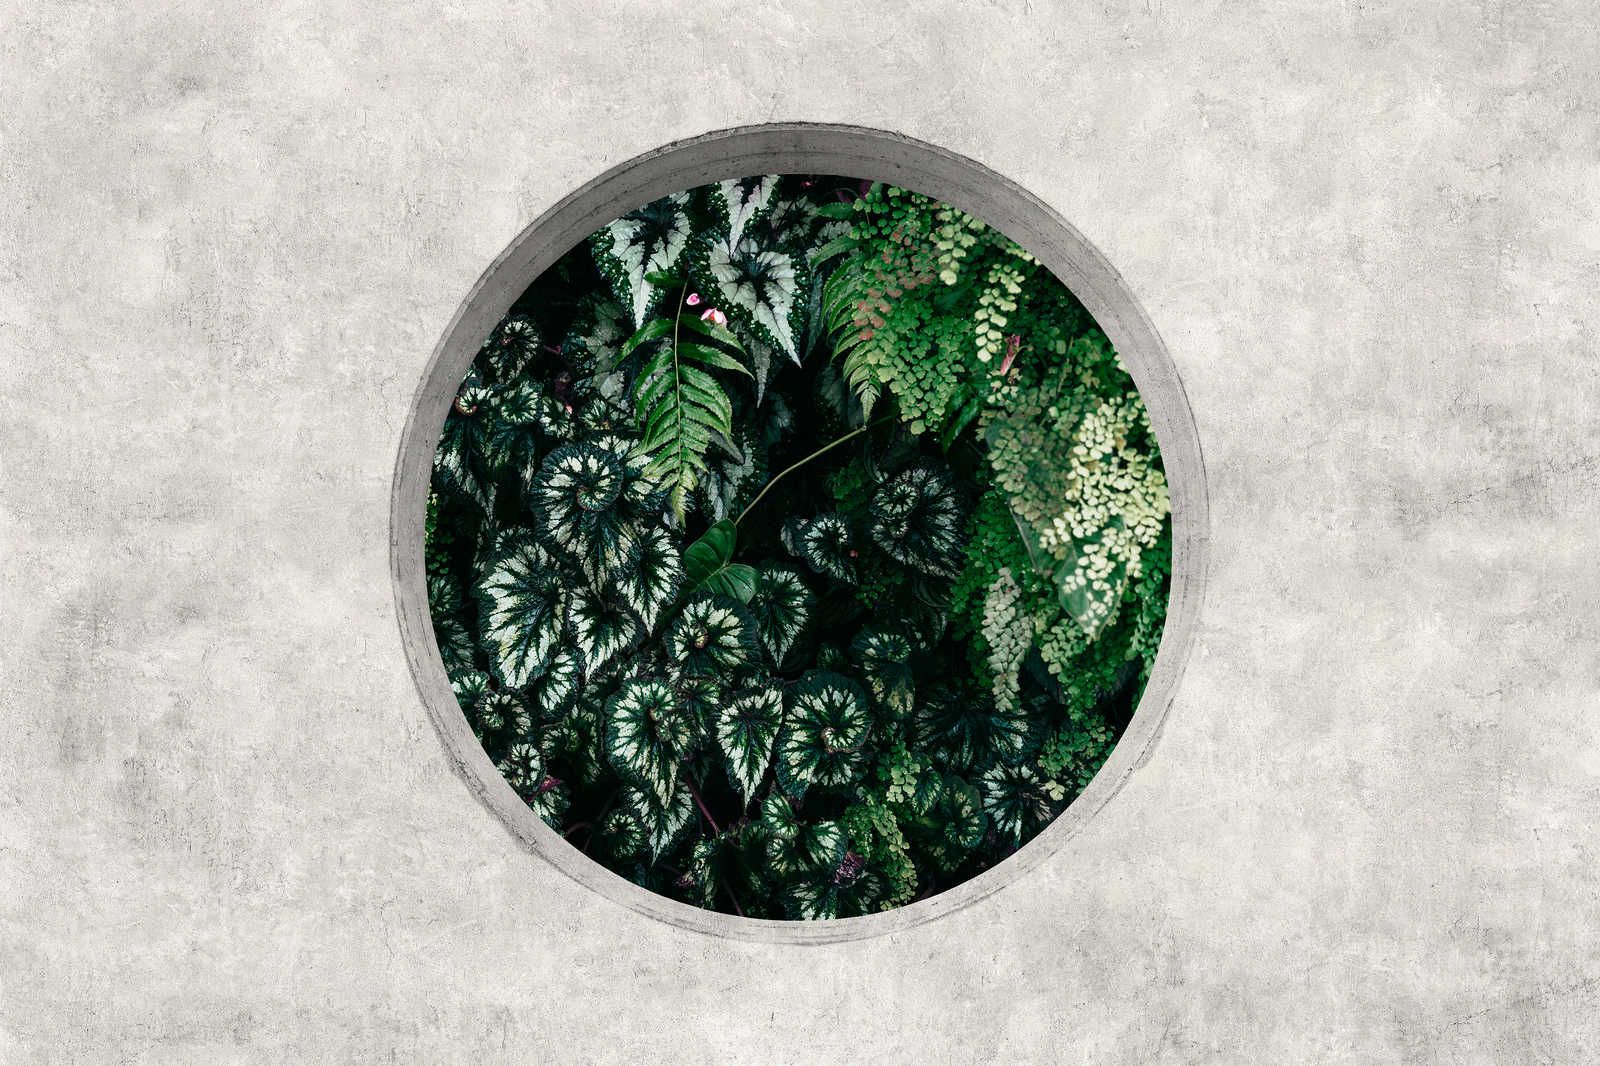             Deep Green 1 - Canvas painting Window Round with Jungle Plants - 0,90 m x 0,60 m
        